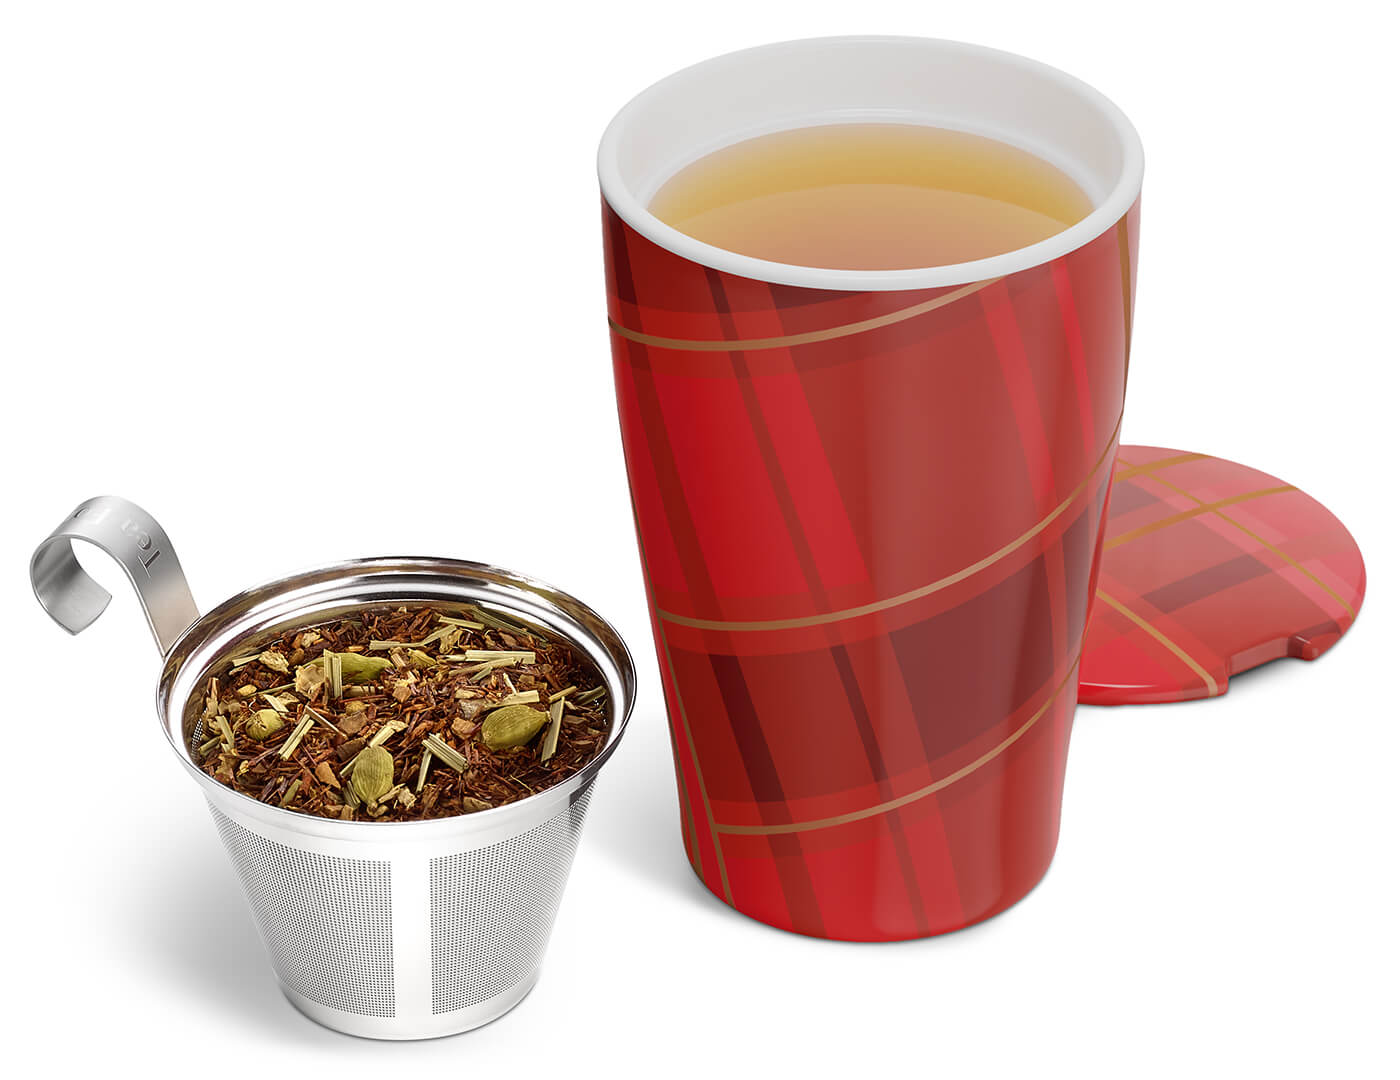 Warming Joy KATI Steeping Cup with stainless steel infusing basket and ceramic lid